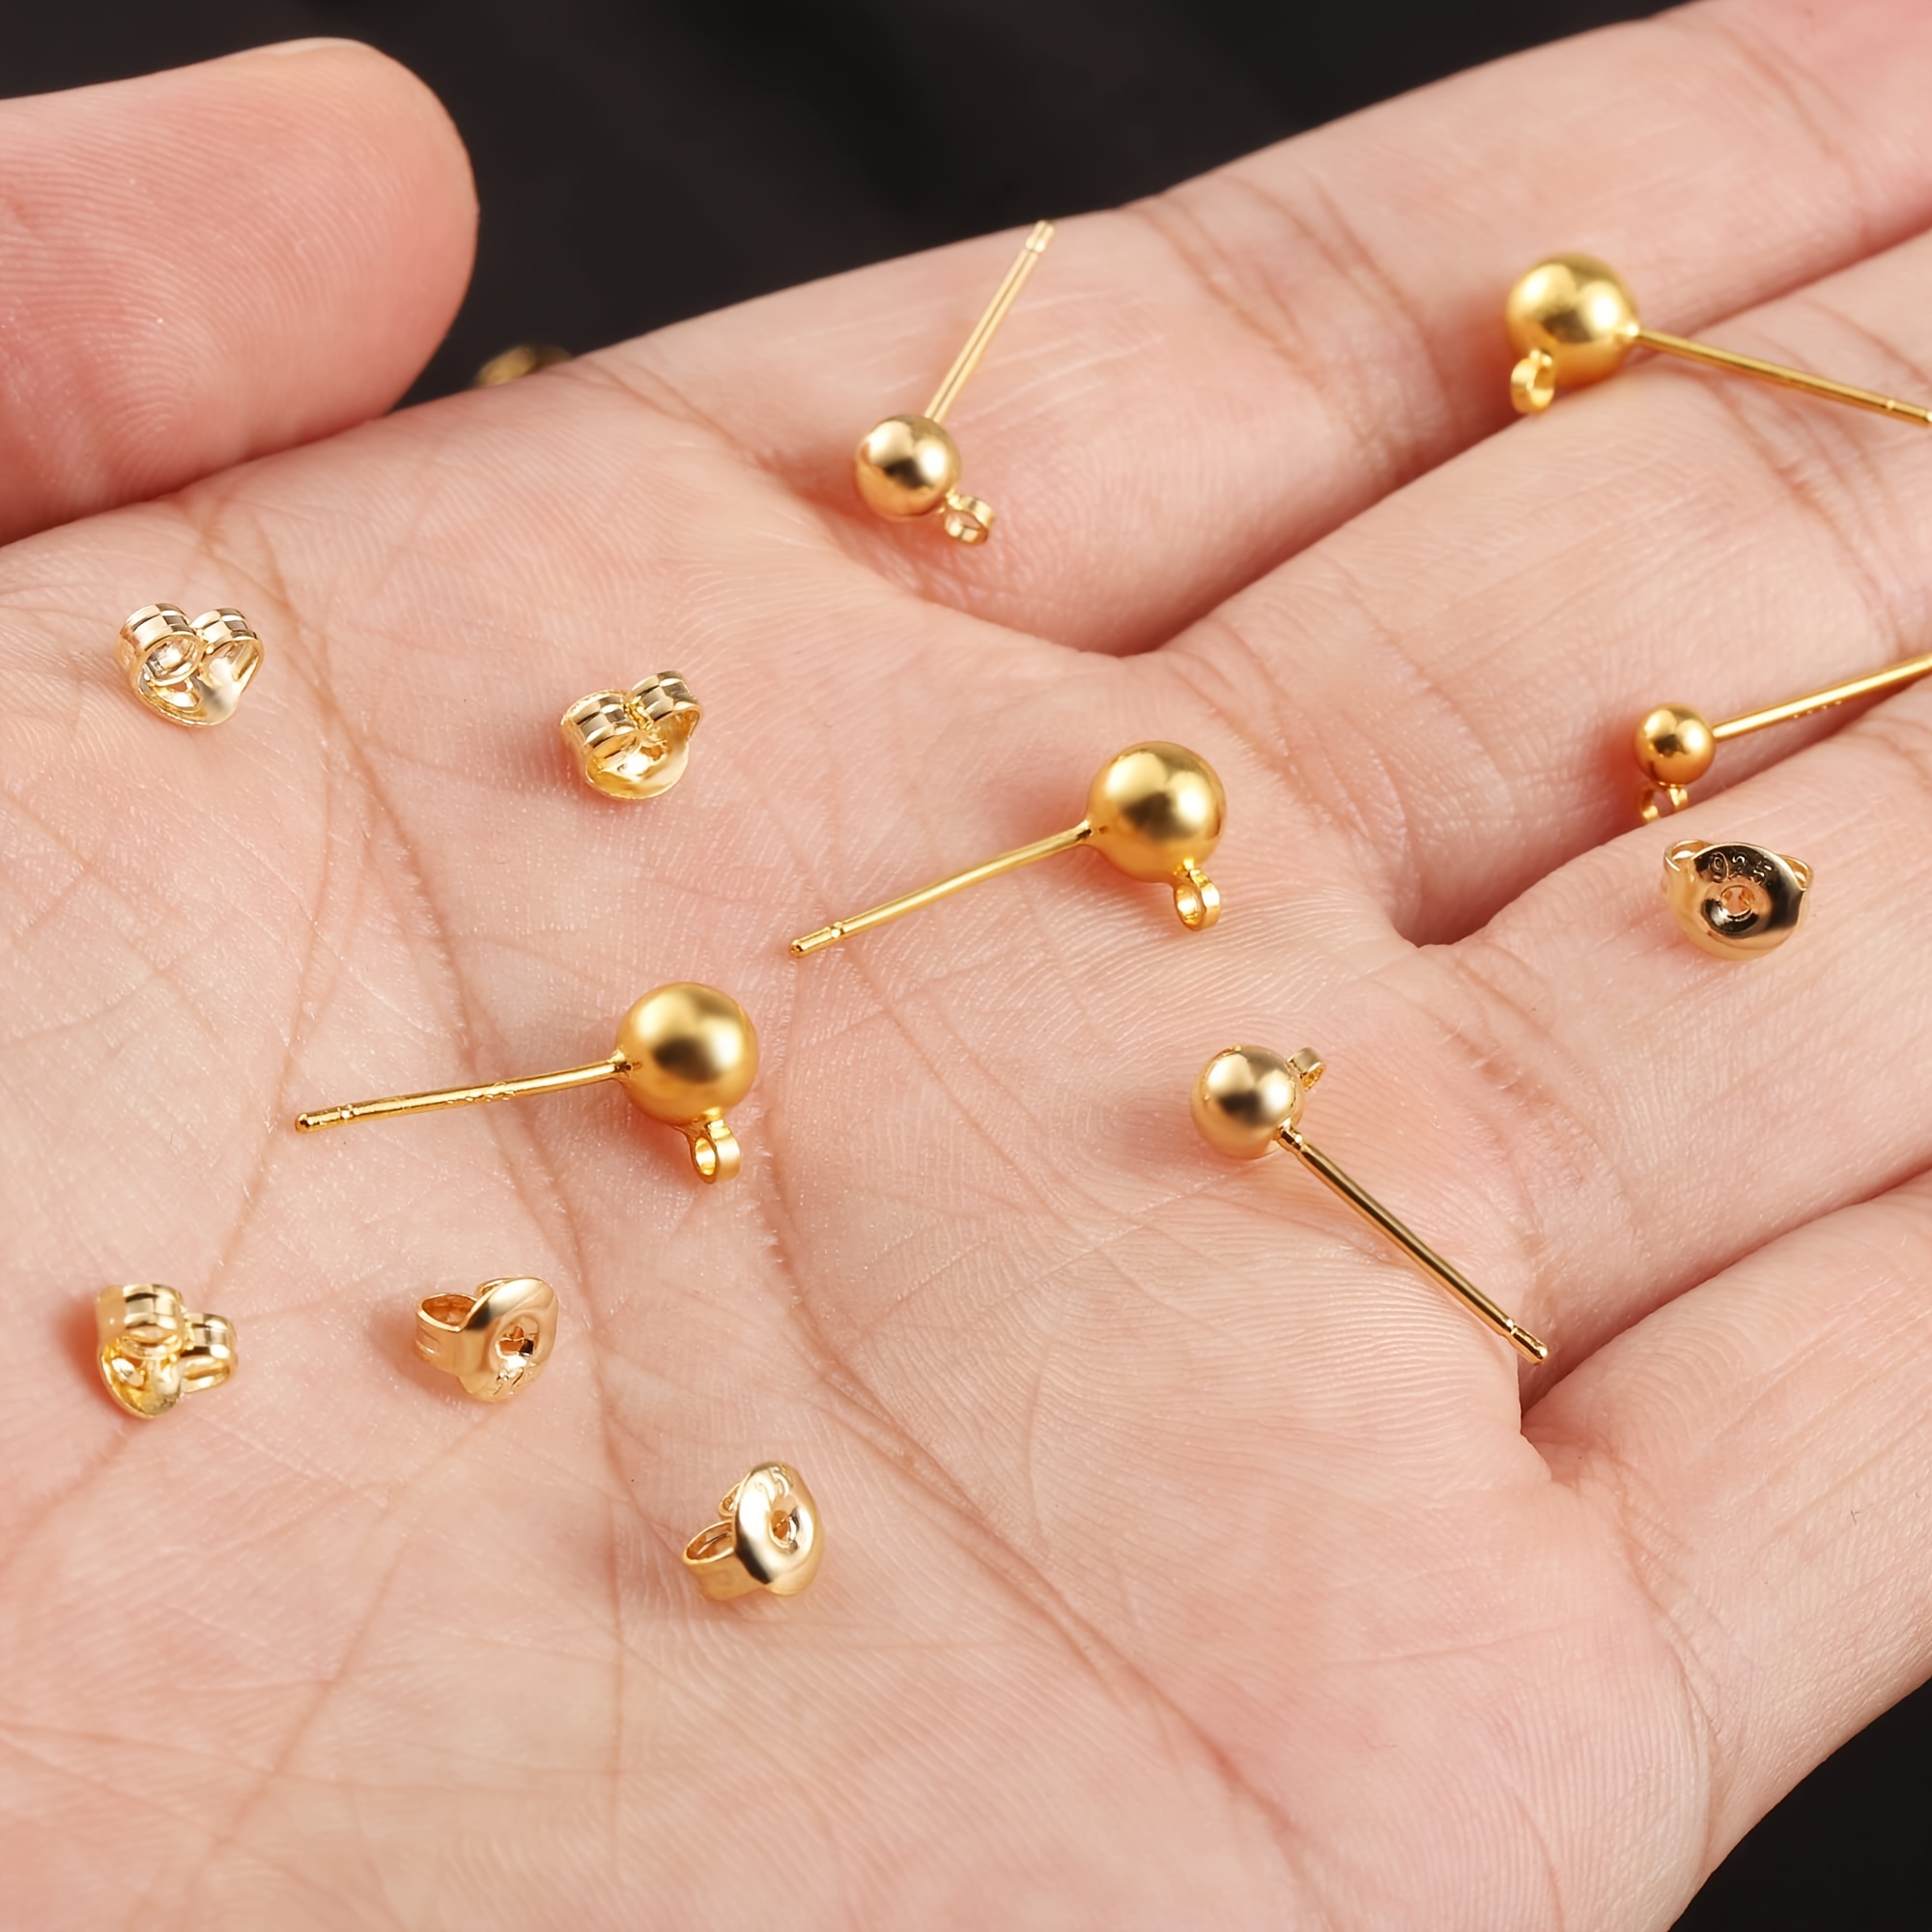 Beebeecraft 100PCS 24K Gold Plated Earring Studs Earring Posts Ball Stud  Earrings with Loop with 100Pcs Butterfly Ear Back for DIY Jewelry Dangle  Earring Making(15x7mm) 24K Ball Studs